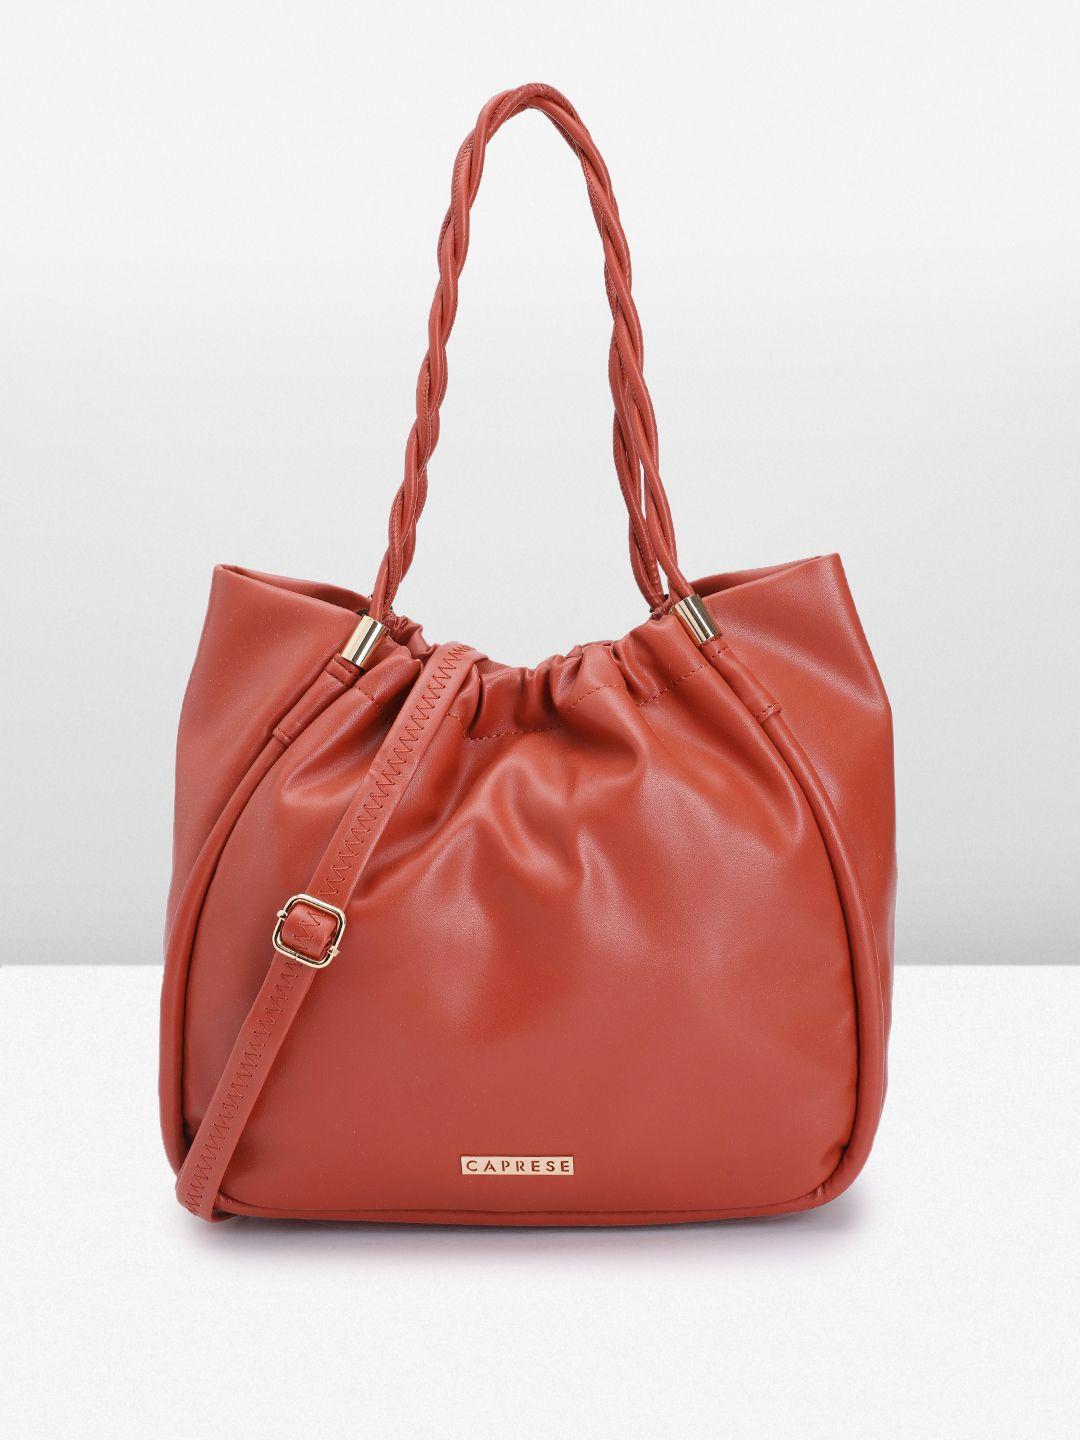 caprese solid regular structured shoulder bag with gathered or pleated detail